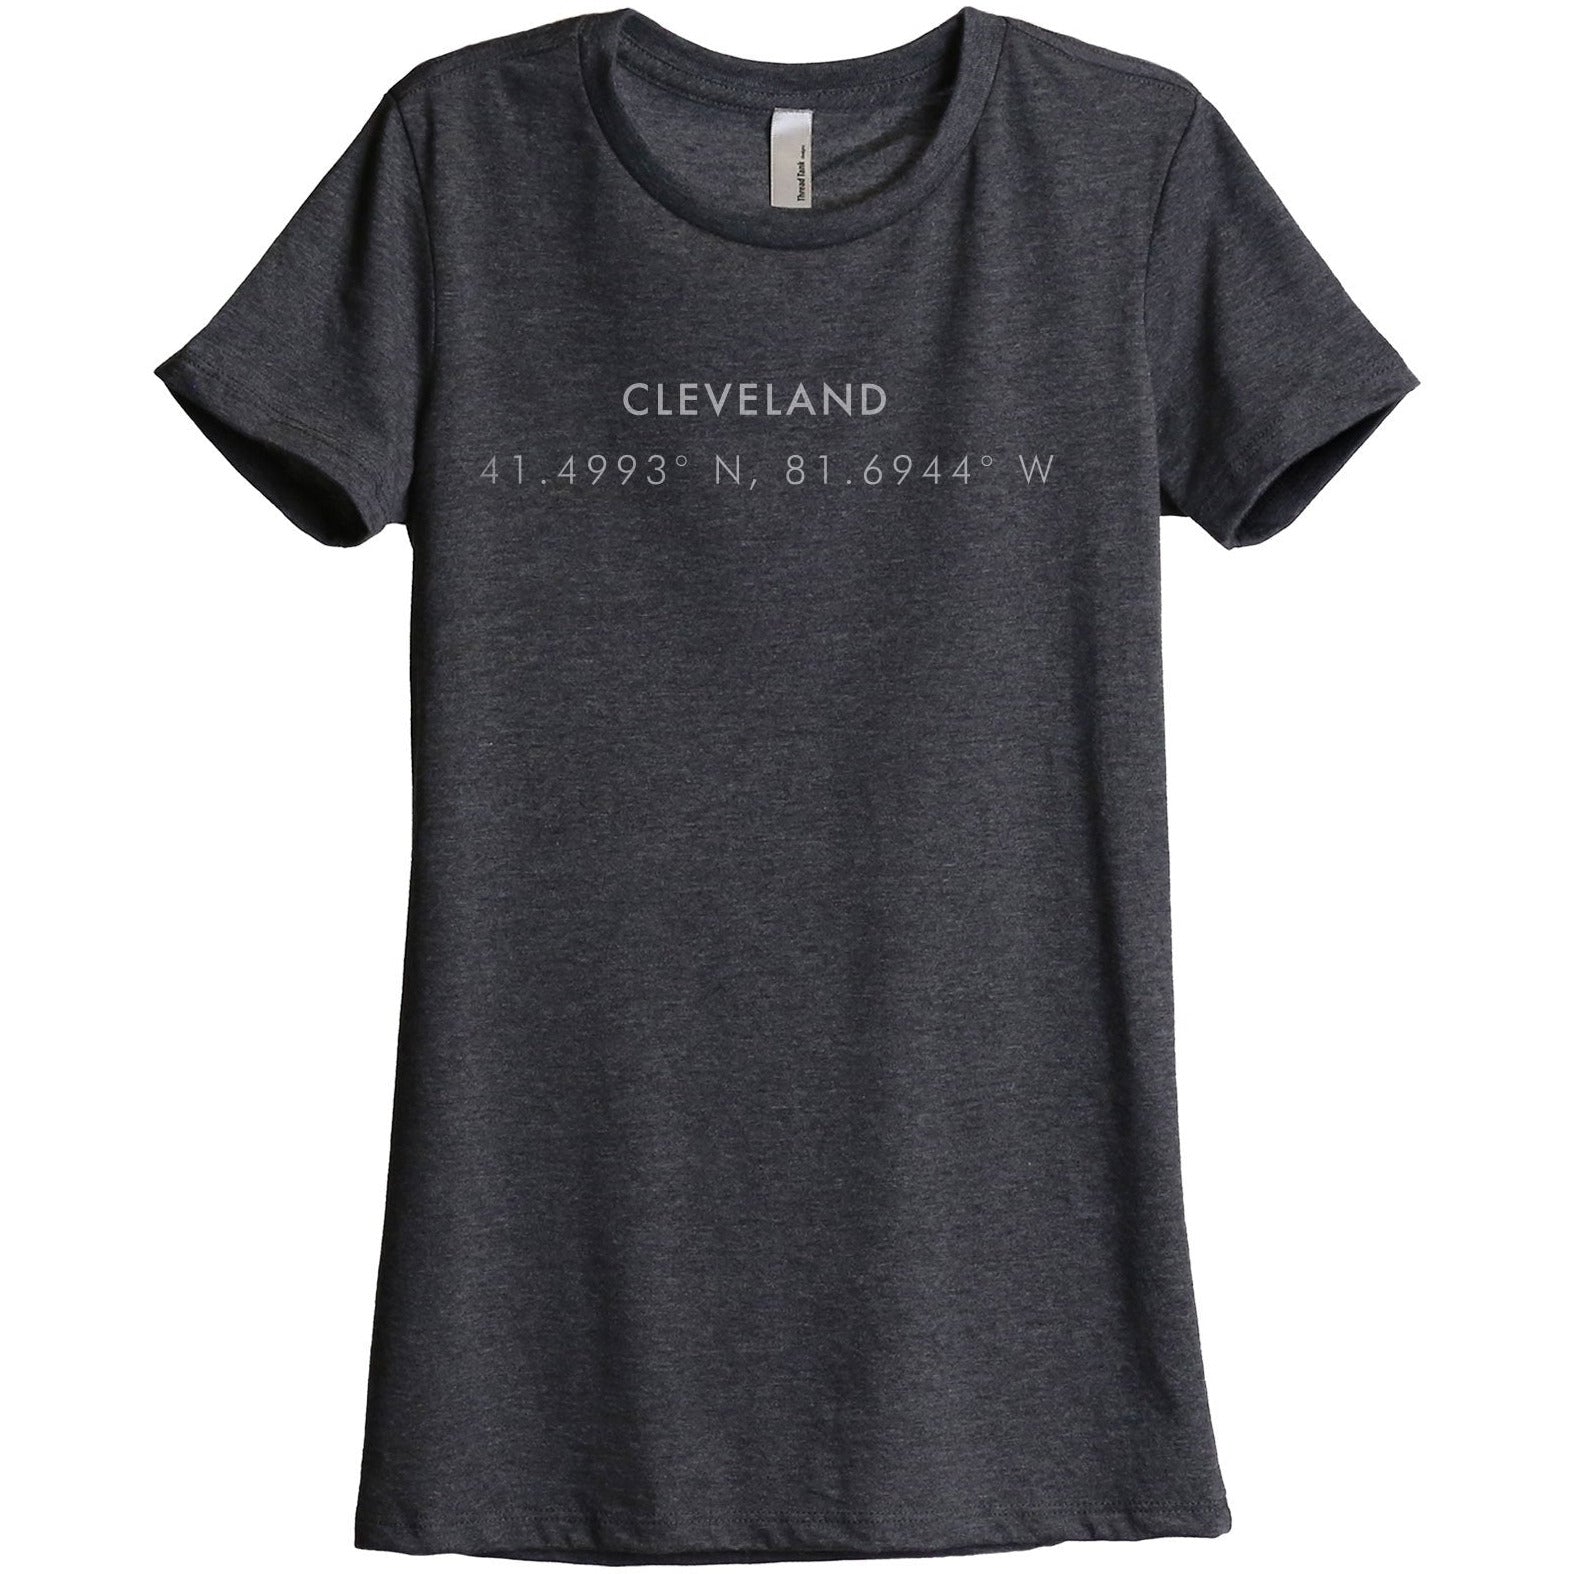 Cleveland Ohio Coordinates Women's Relaxed Crewneck T-Shirt Top Tee Charcoal Grey
